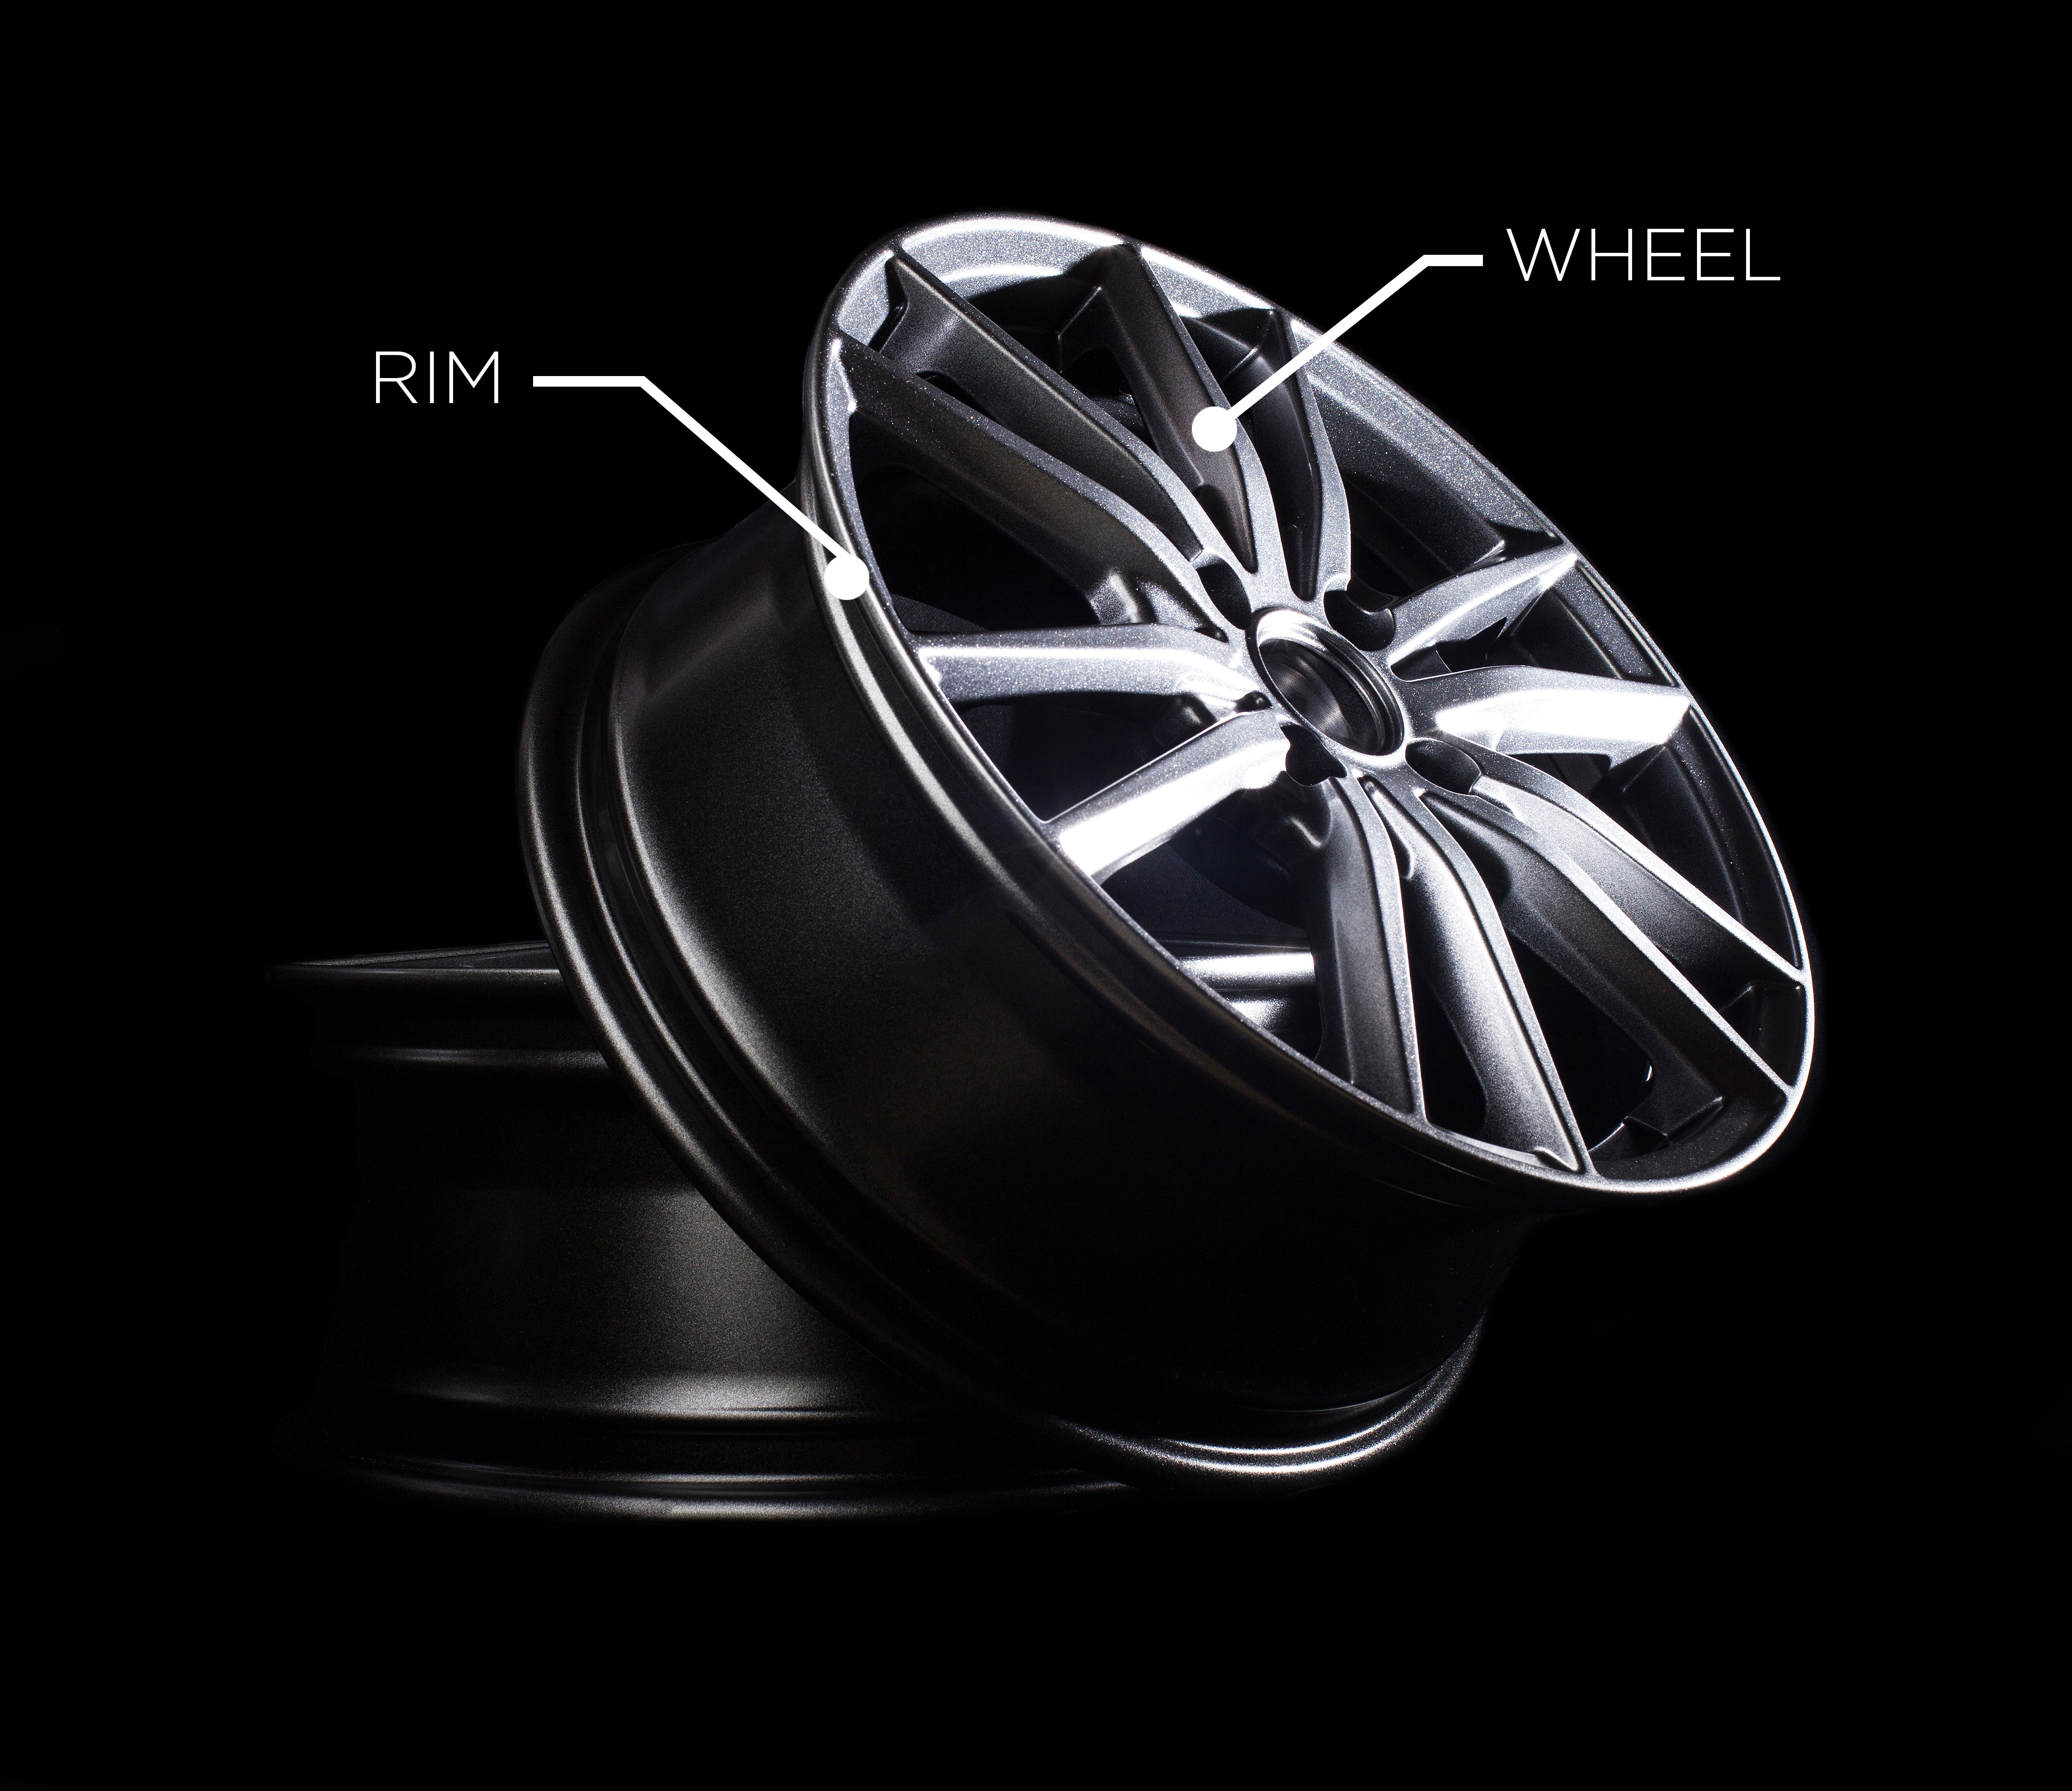 picture of a wheel demonstrating the difference between the rim and the rest of the wheel